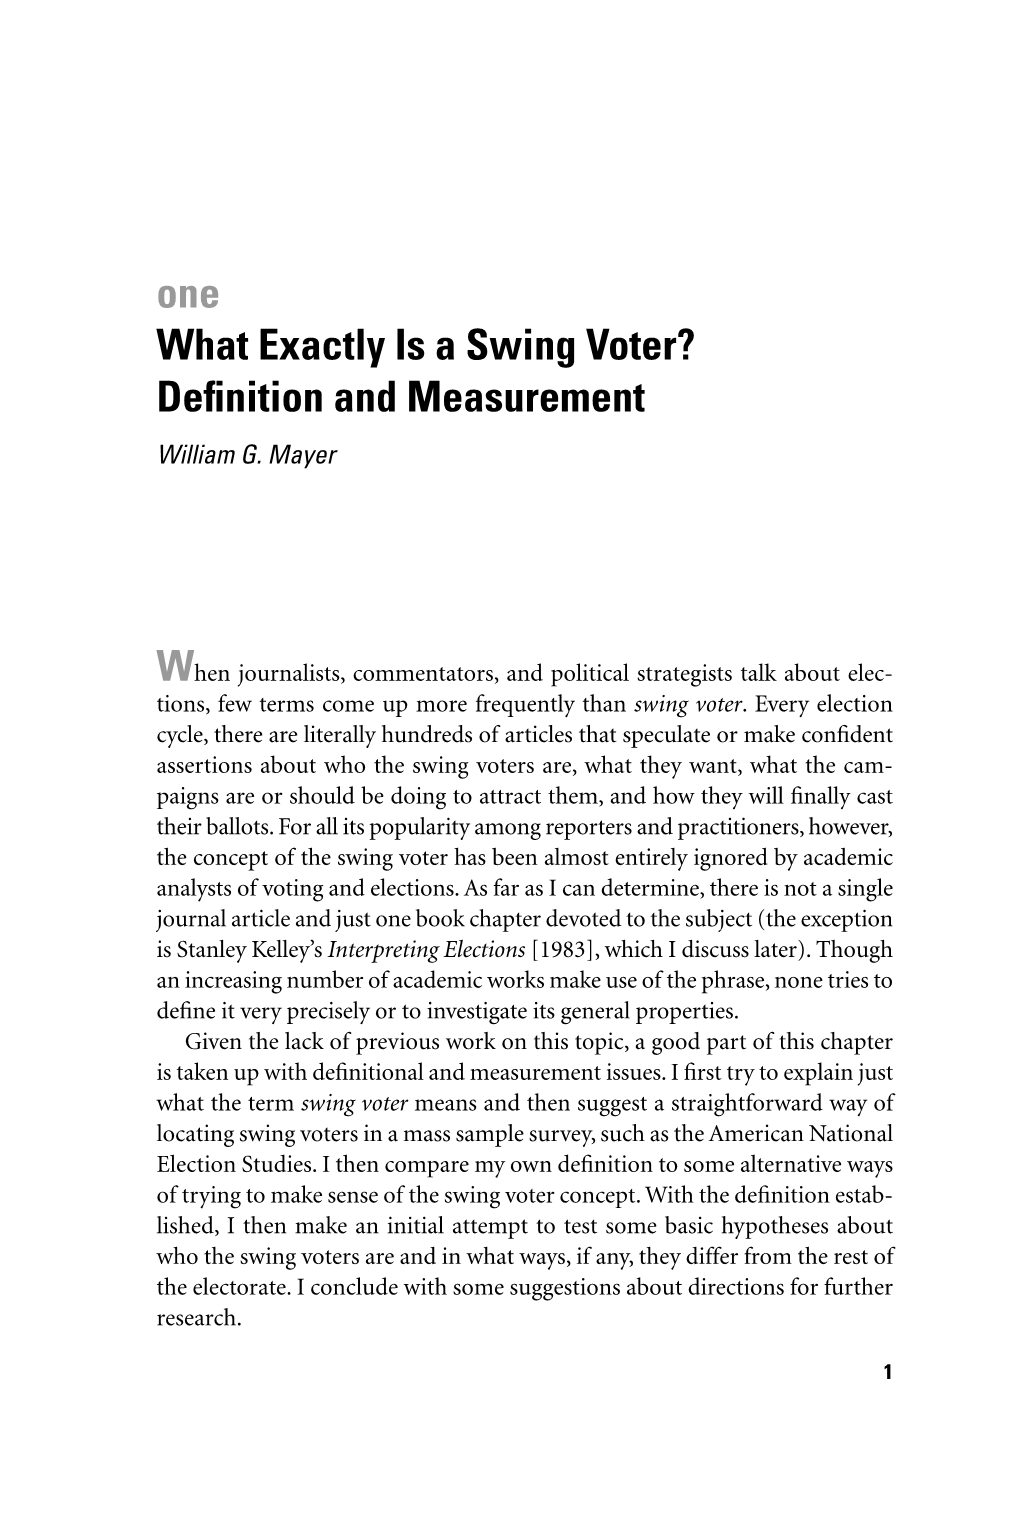 One What Exactly Is a Swing Voter? Definition and Measurement